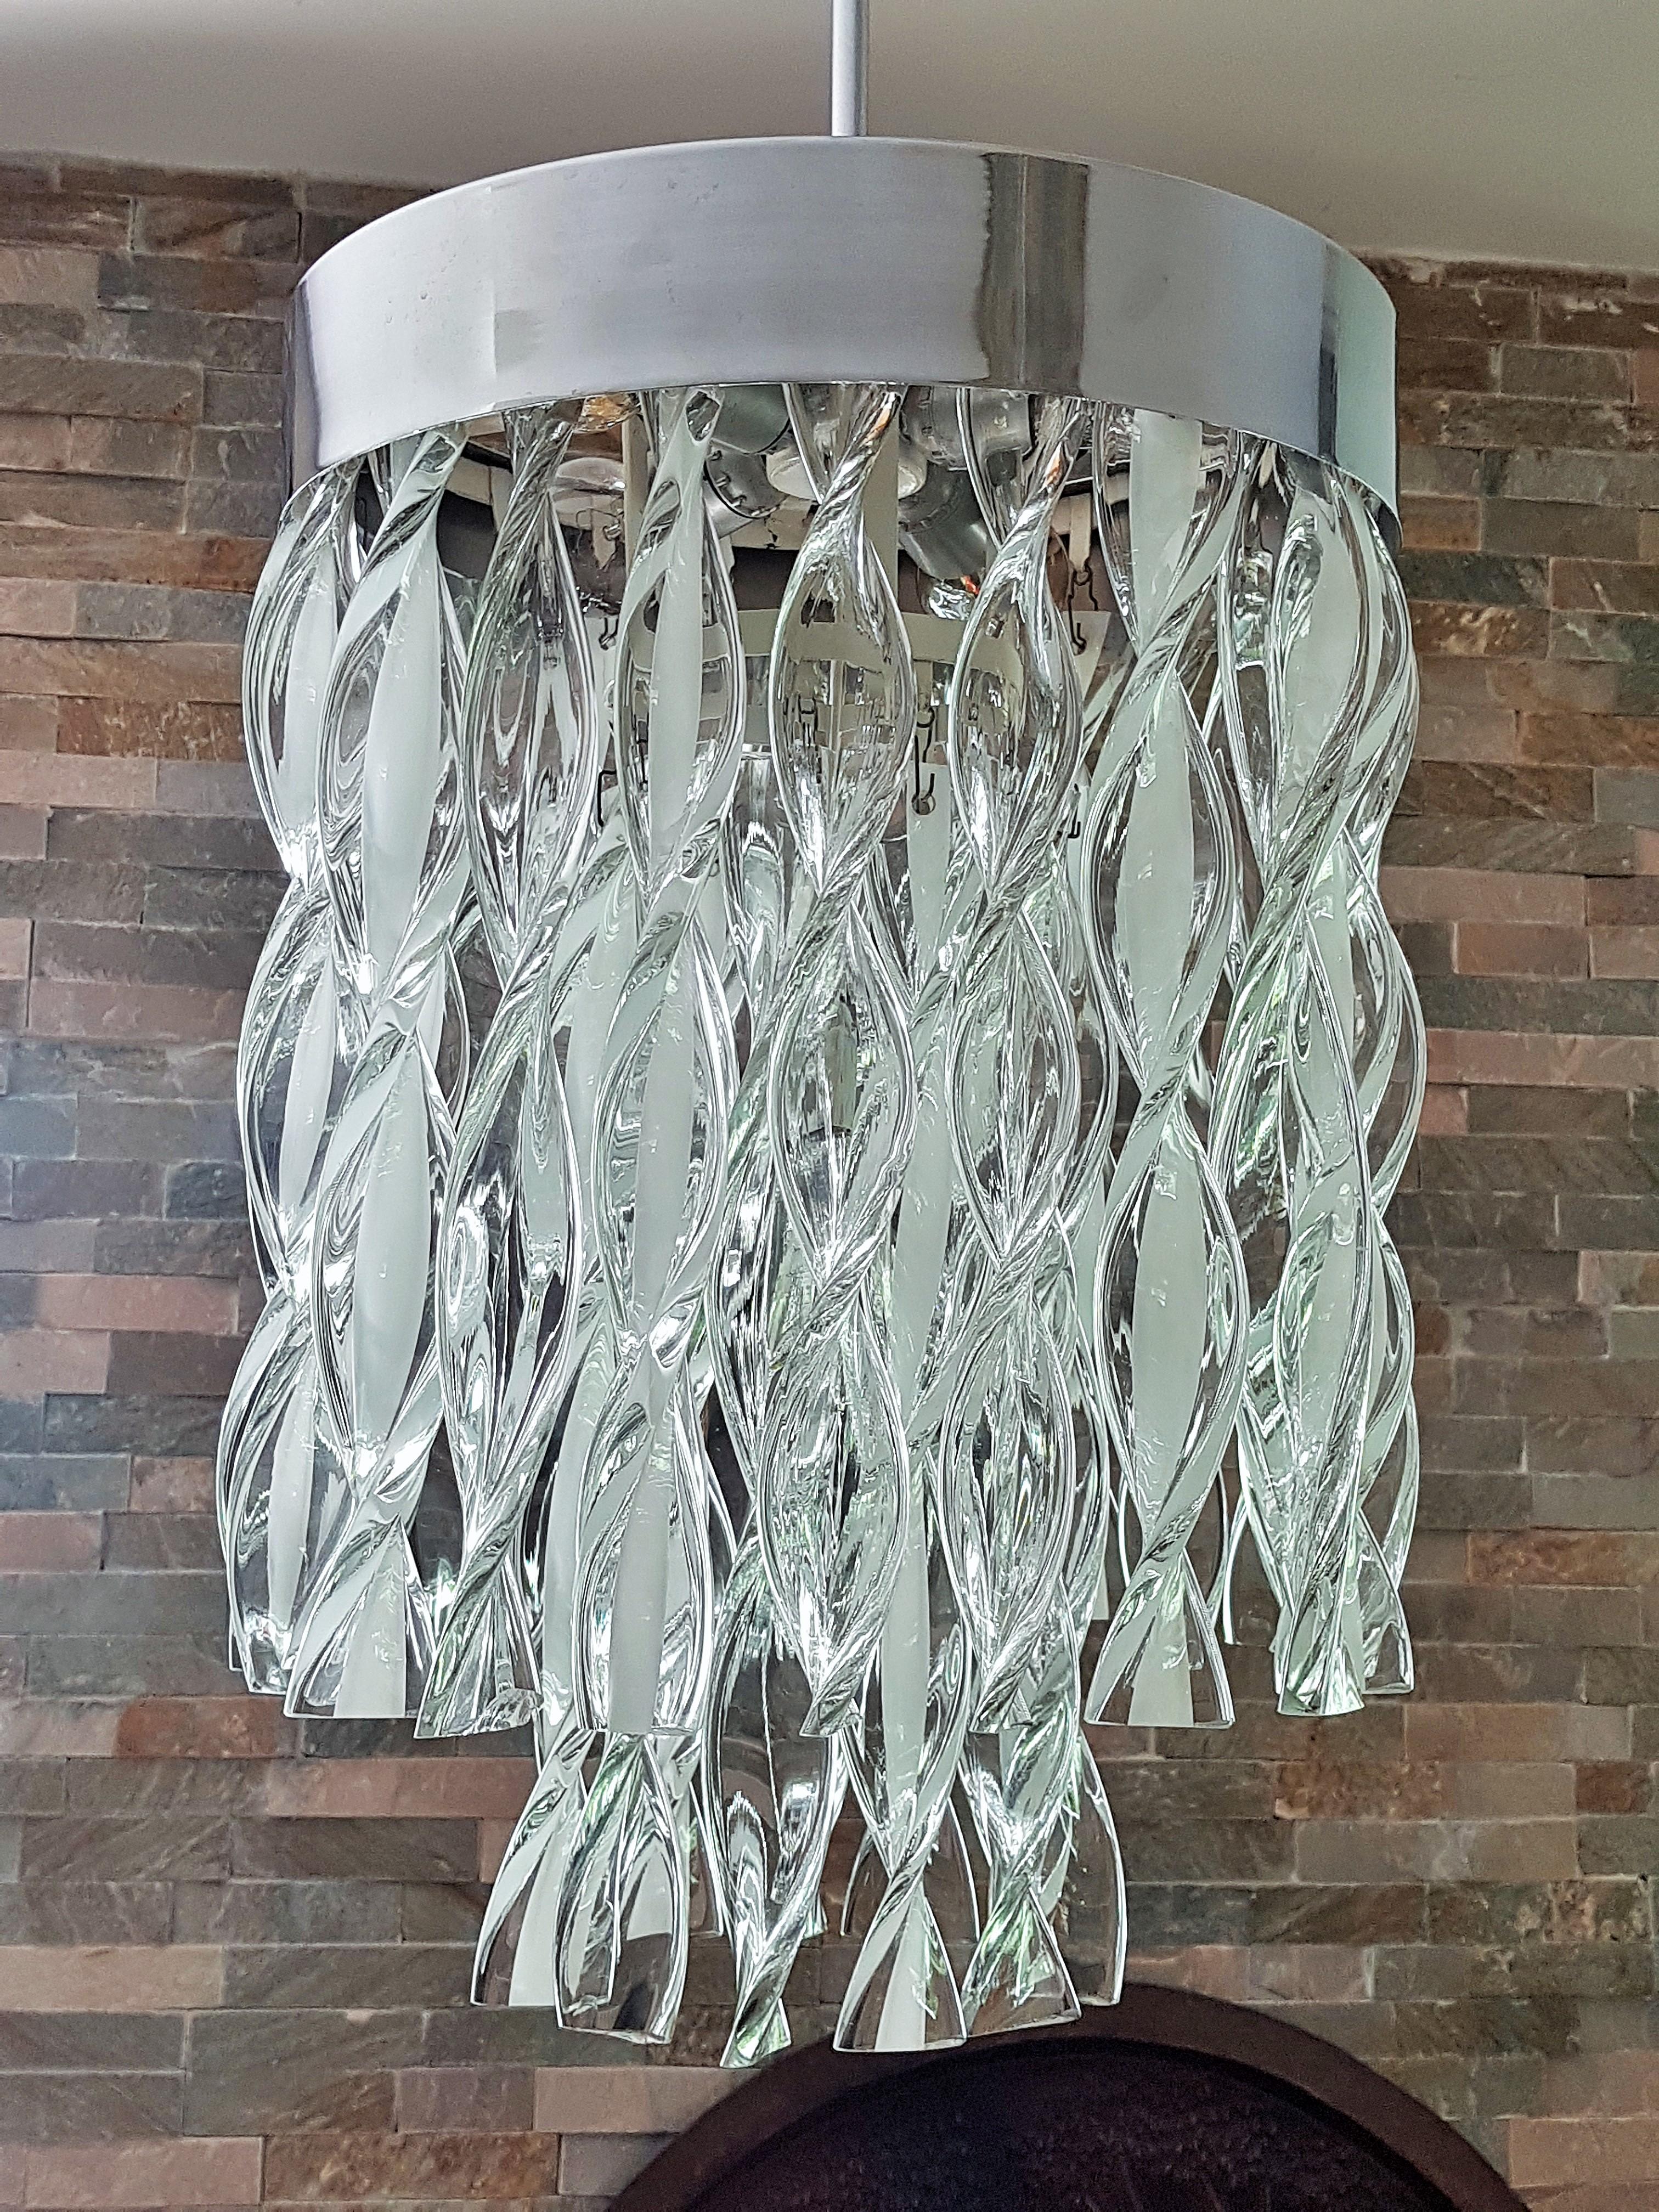 Midcentury Murano Glass Chandelier by Mazzega, Italy, 1965 For Sale 13